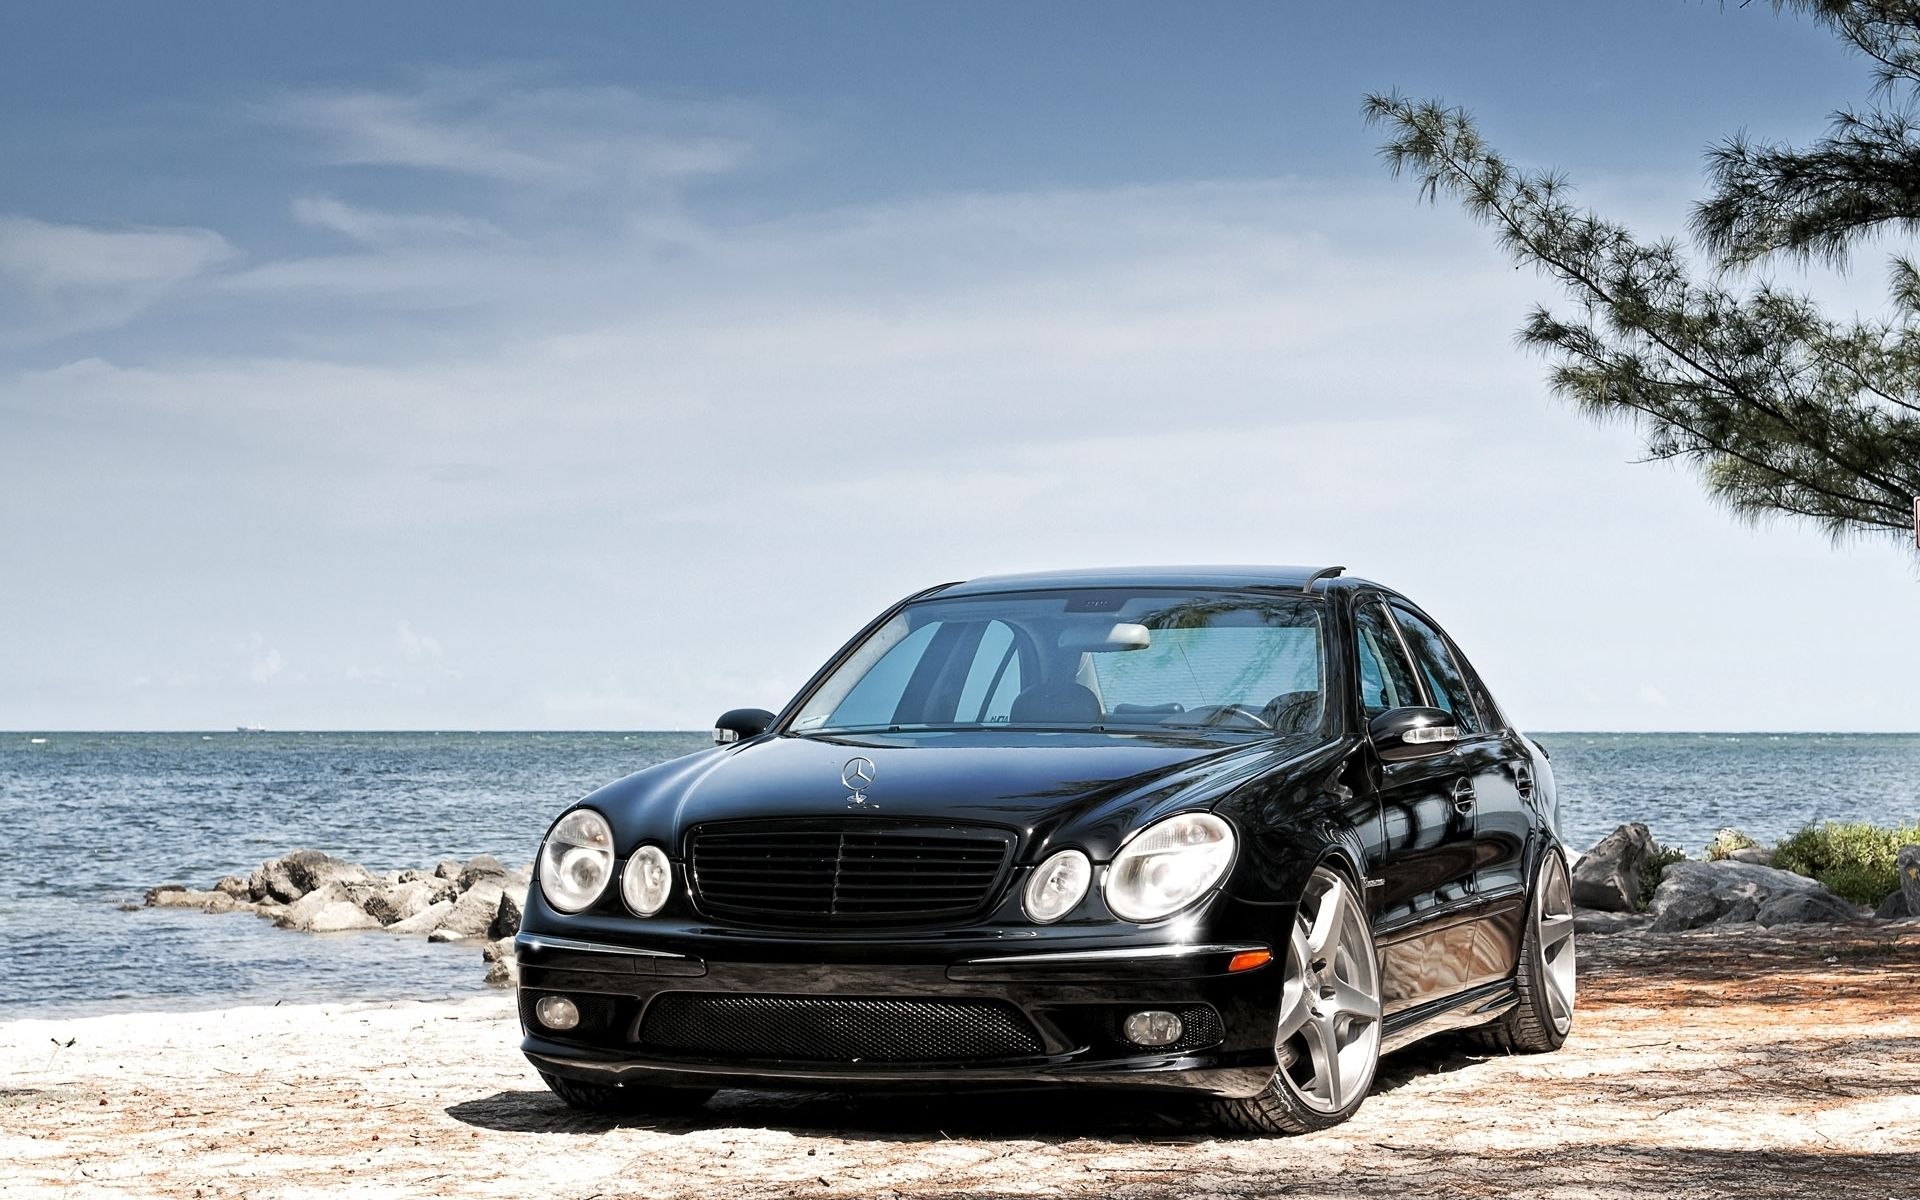 Mercedes-Benz E class wallpapers and images - wallpapers, pictures ...